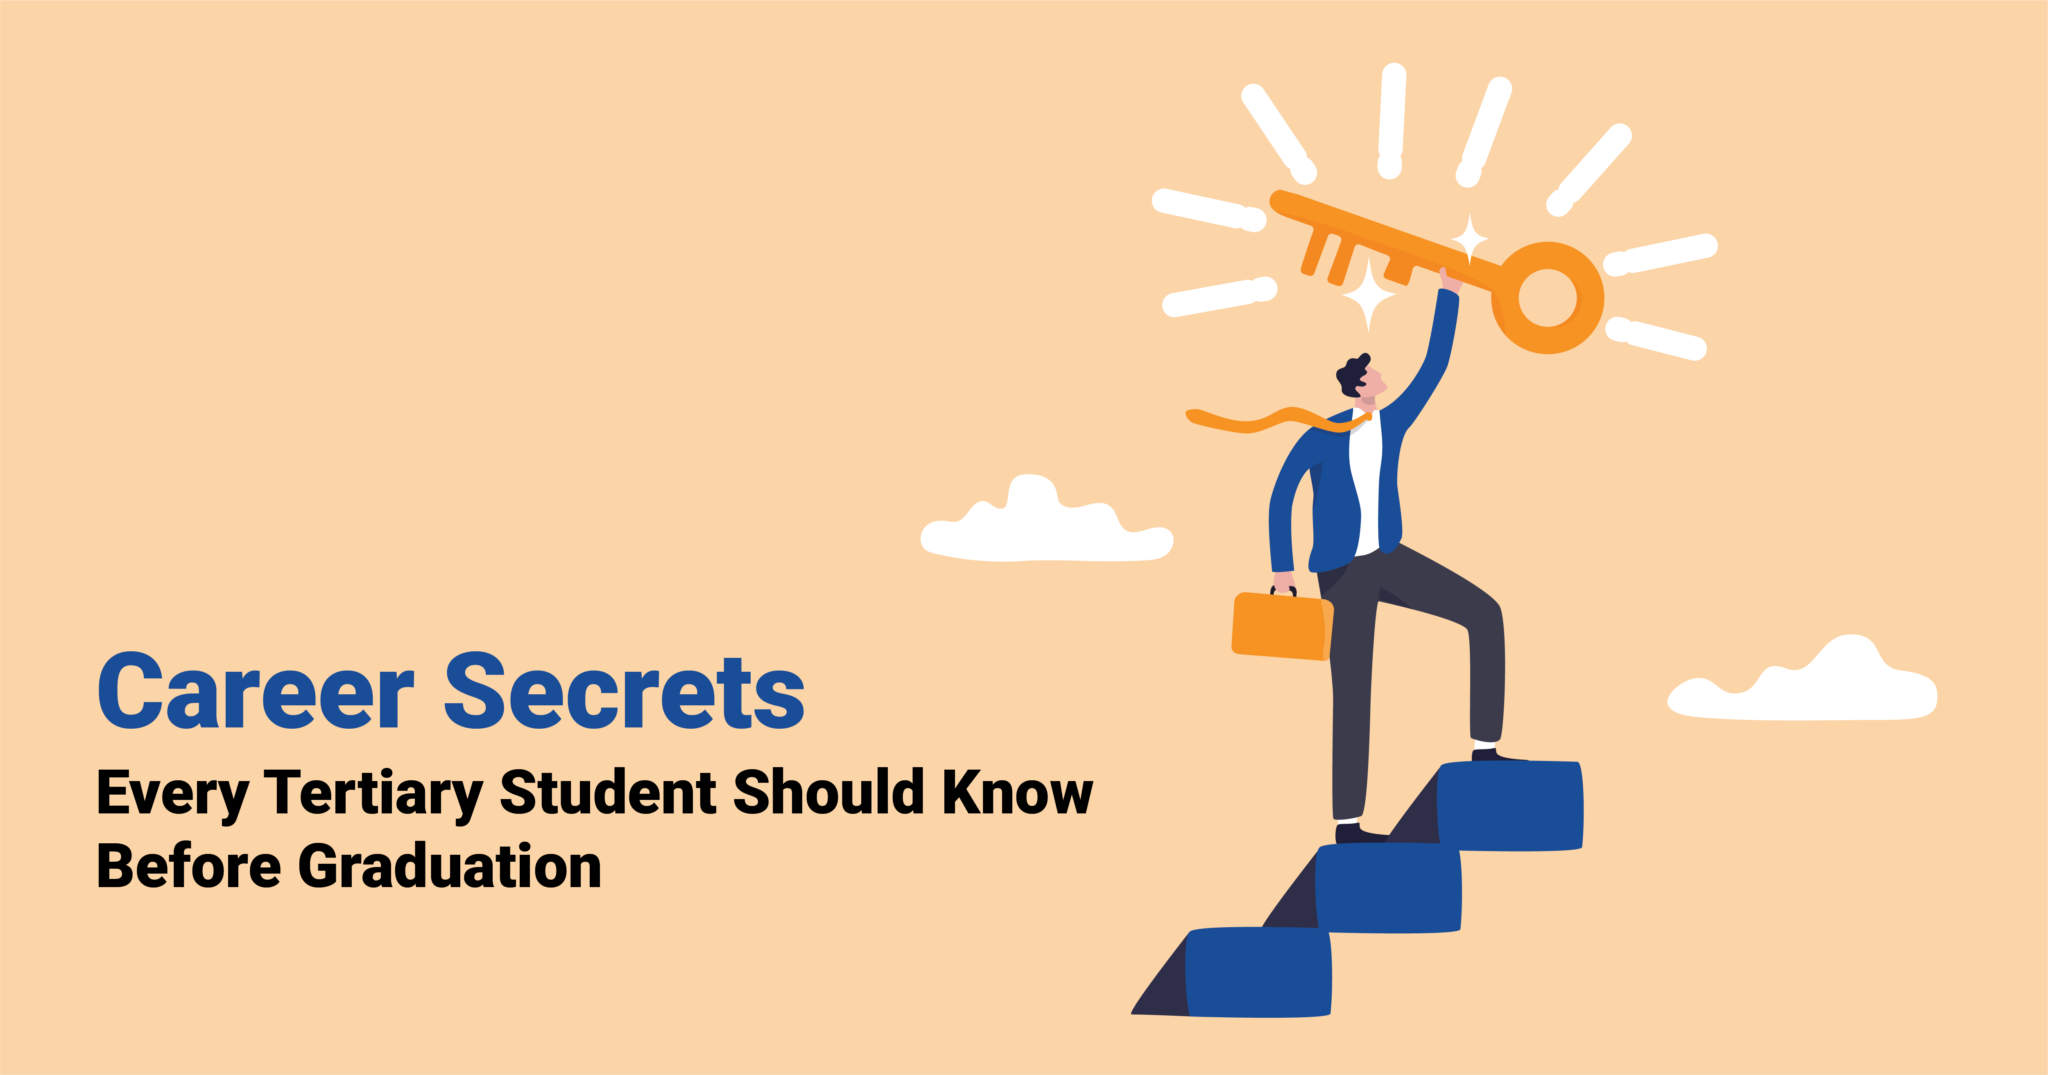 Career secrets every tertiary student should know before Graduation